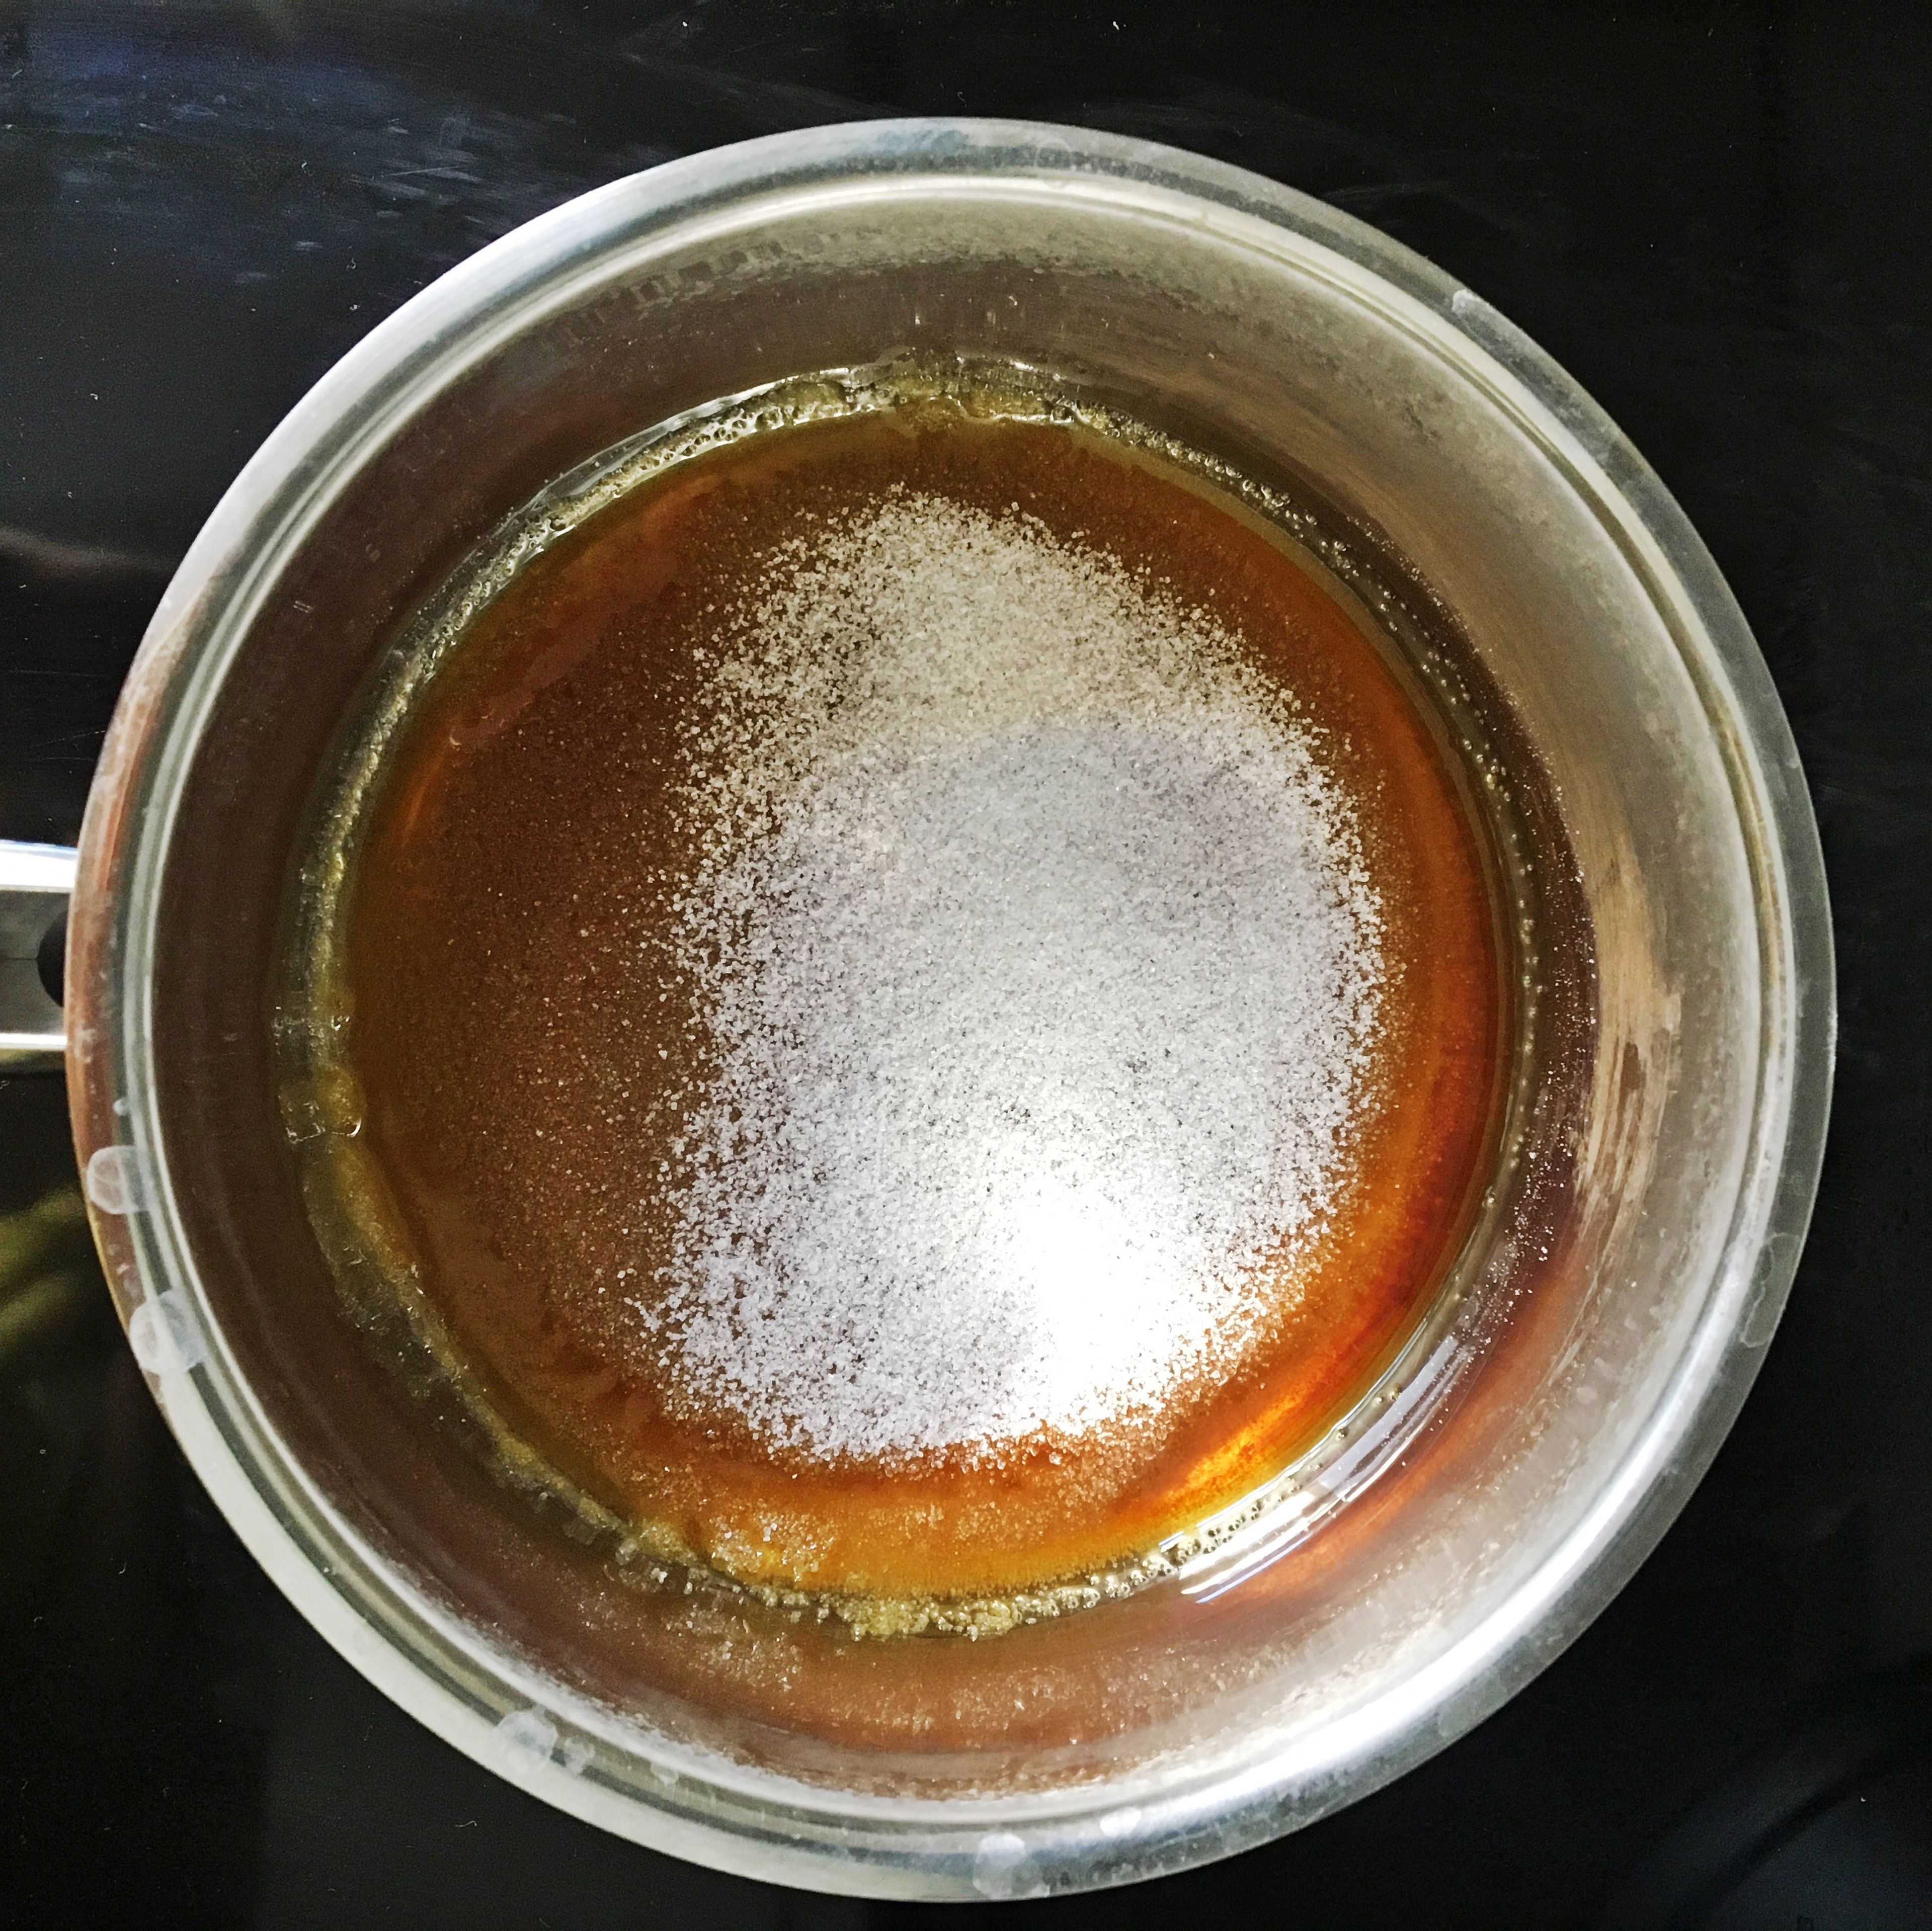 For the caramel sauce, add sugar to a saucepan over medium heat and let it caramelize. Finely chop milk chocolate. Once the sugar is melted, add cream and bring to a simmer. Carefully stir until combined. Add the butter. Remove the saucepan from heat and pour caramel over chopped chocolate. Stir to combine, until the chocolate is melted.